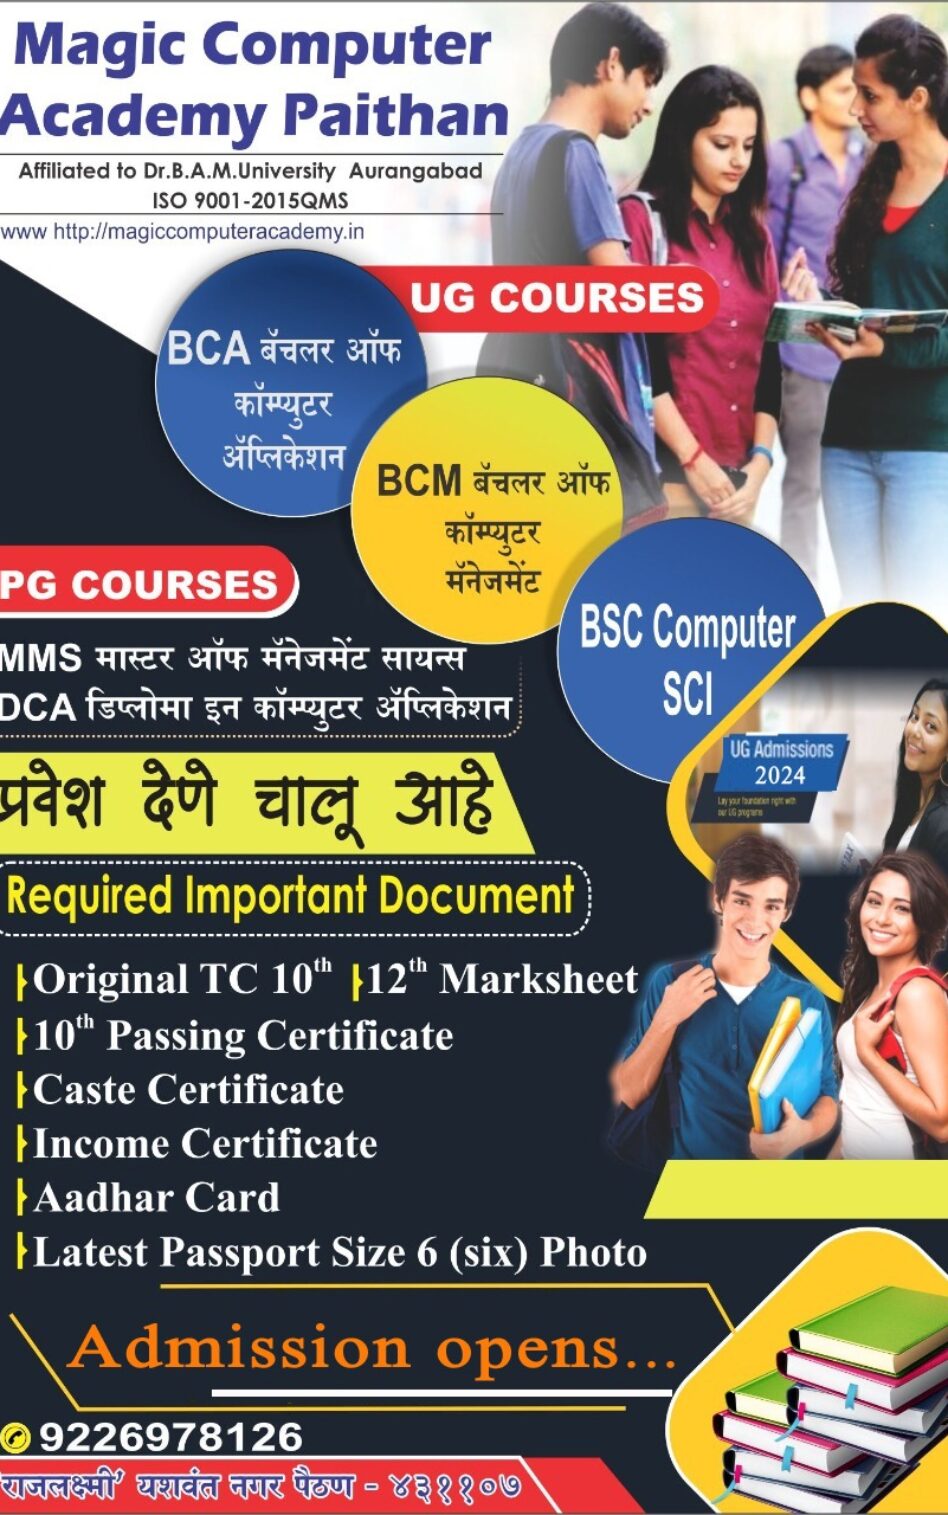  OBC,VJNT ETC NO FEE REQUIRED